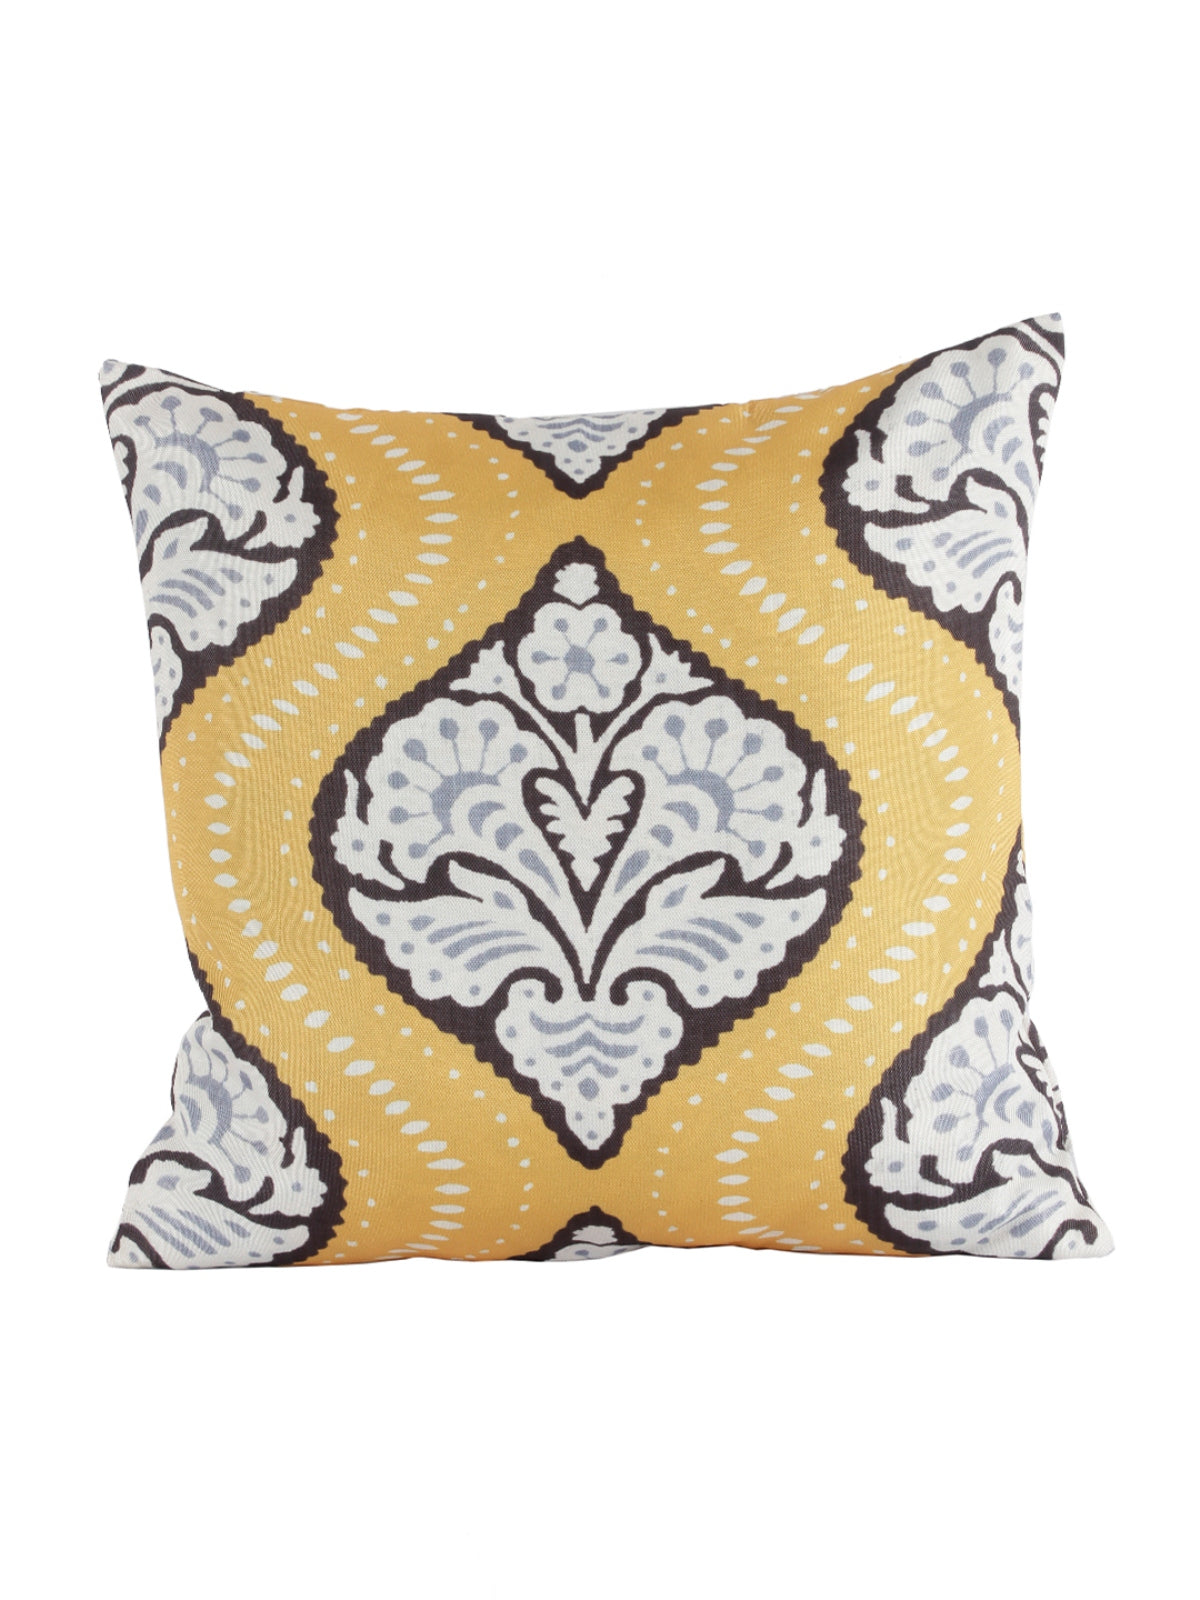 Self Design Polyester Cushion Cover 16x16 Inch, Set of 5 - Yellow and White